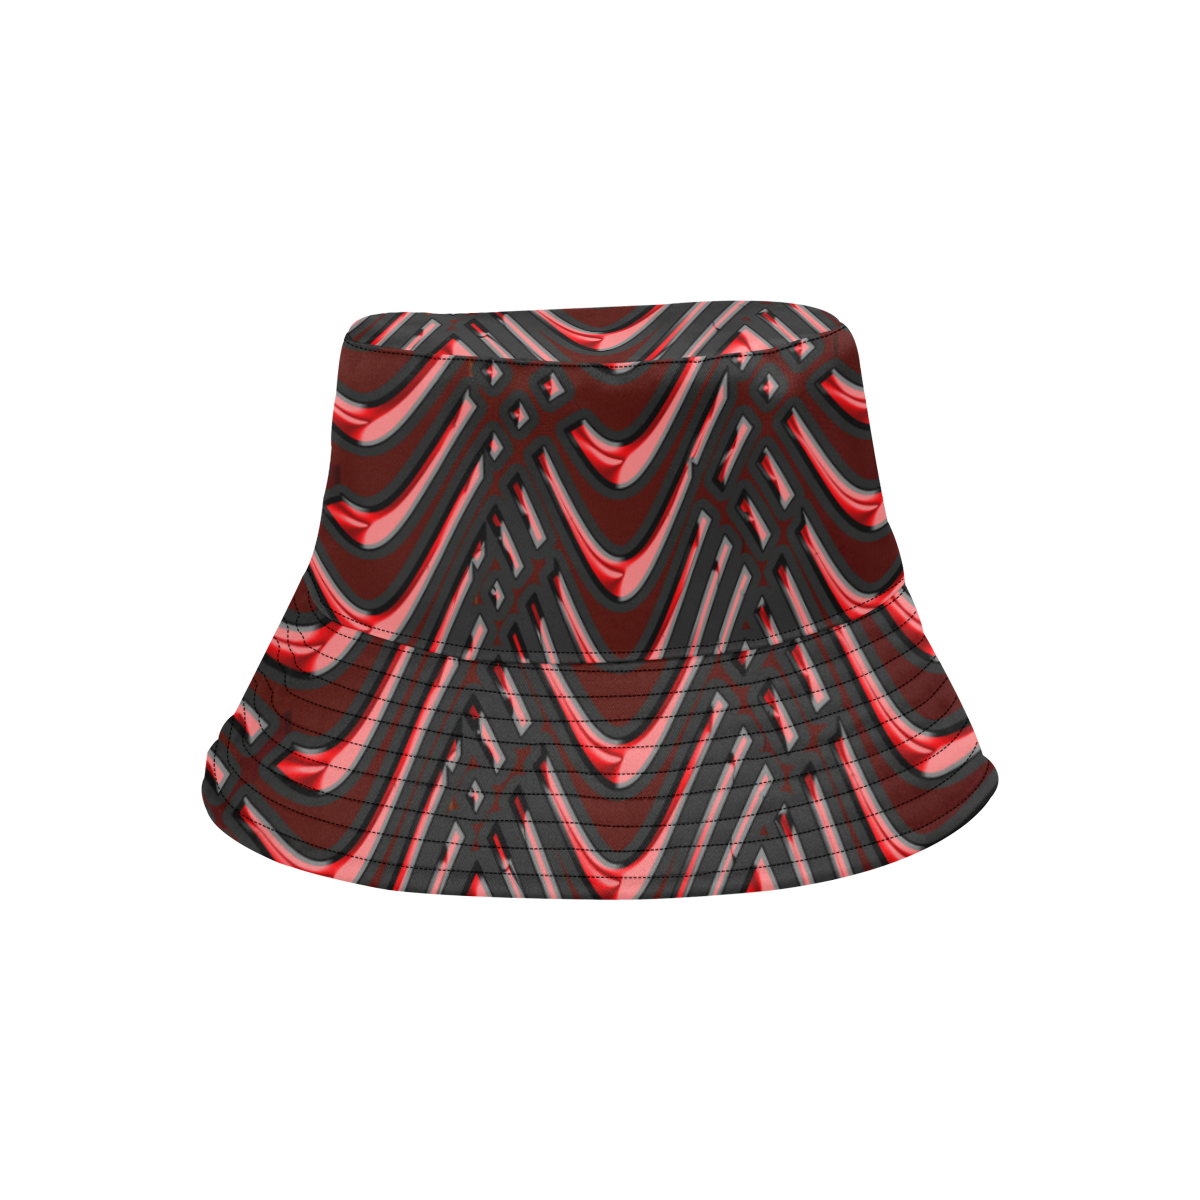 abstract_5500_2019_RBW_7h All Over Print Bucket Hat for Men